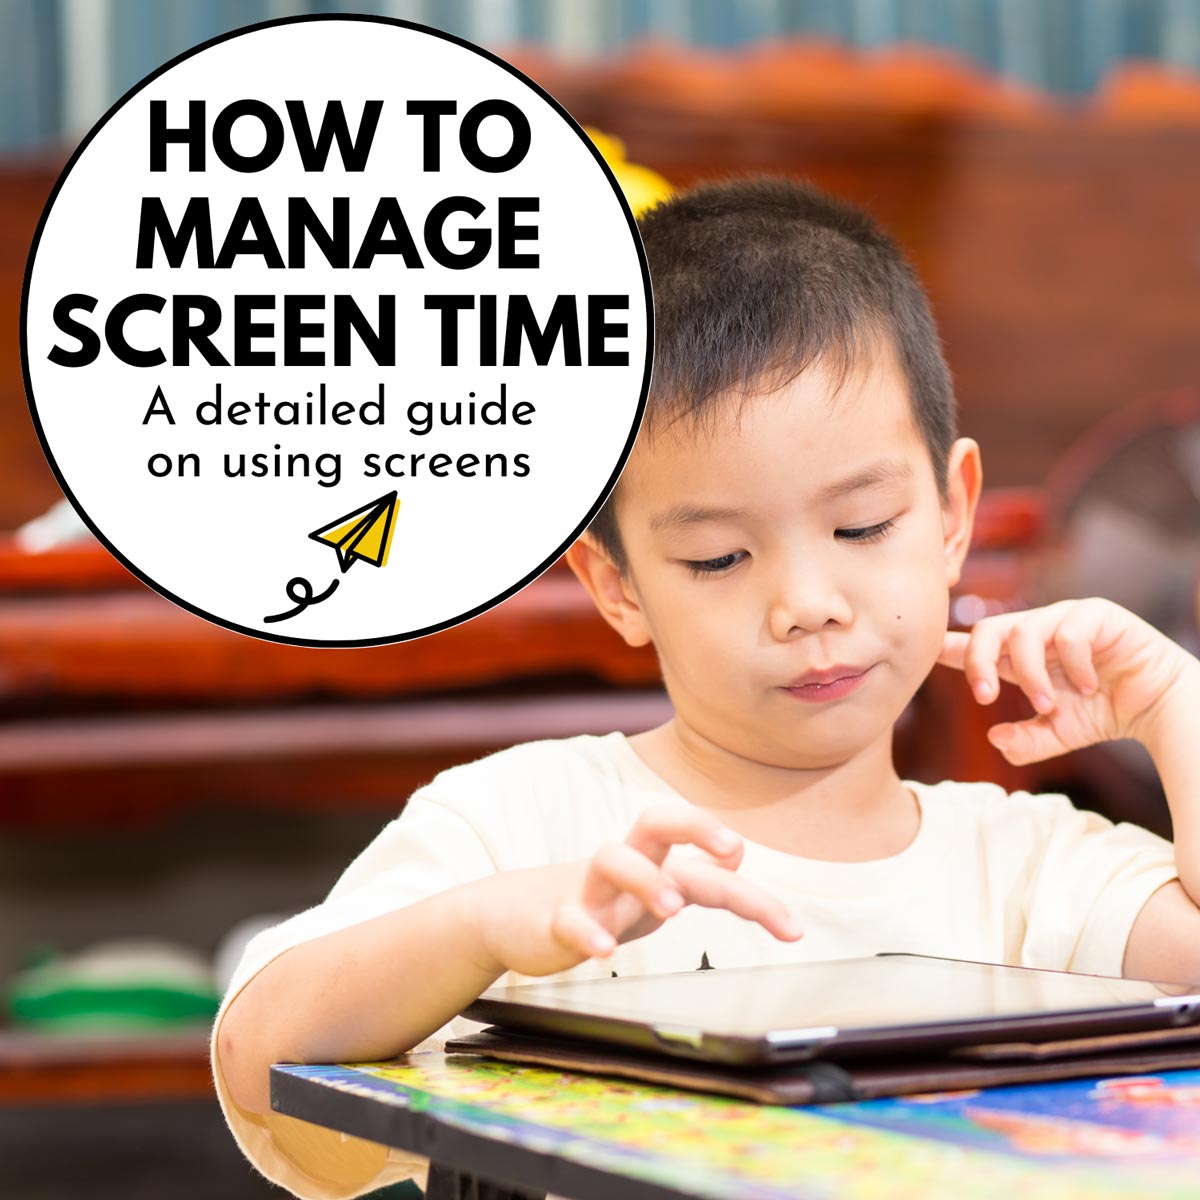 A child taps an ipad. Text reads "How to manage screen time: a detailed guide to using screens"